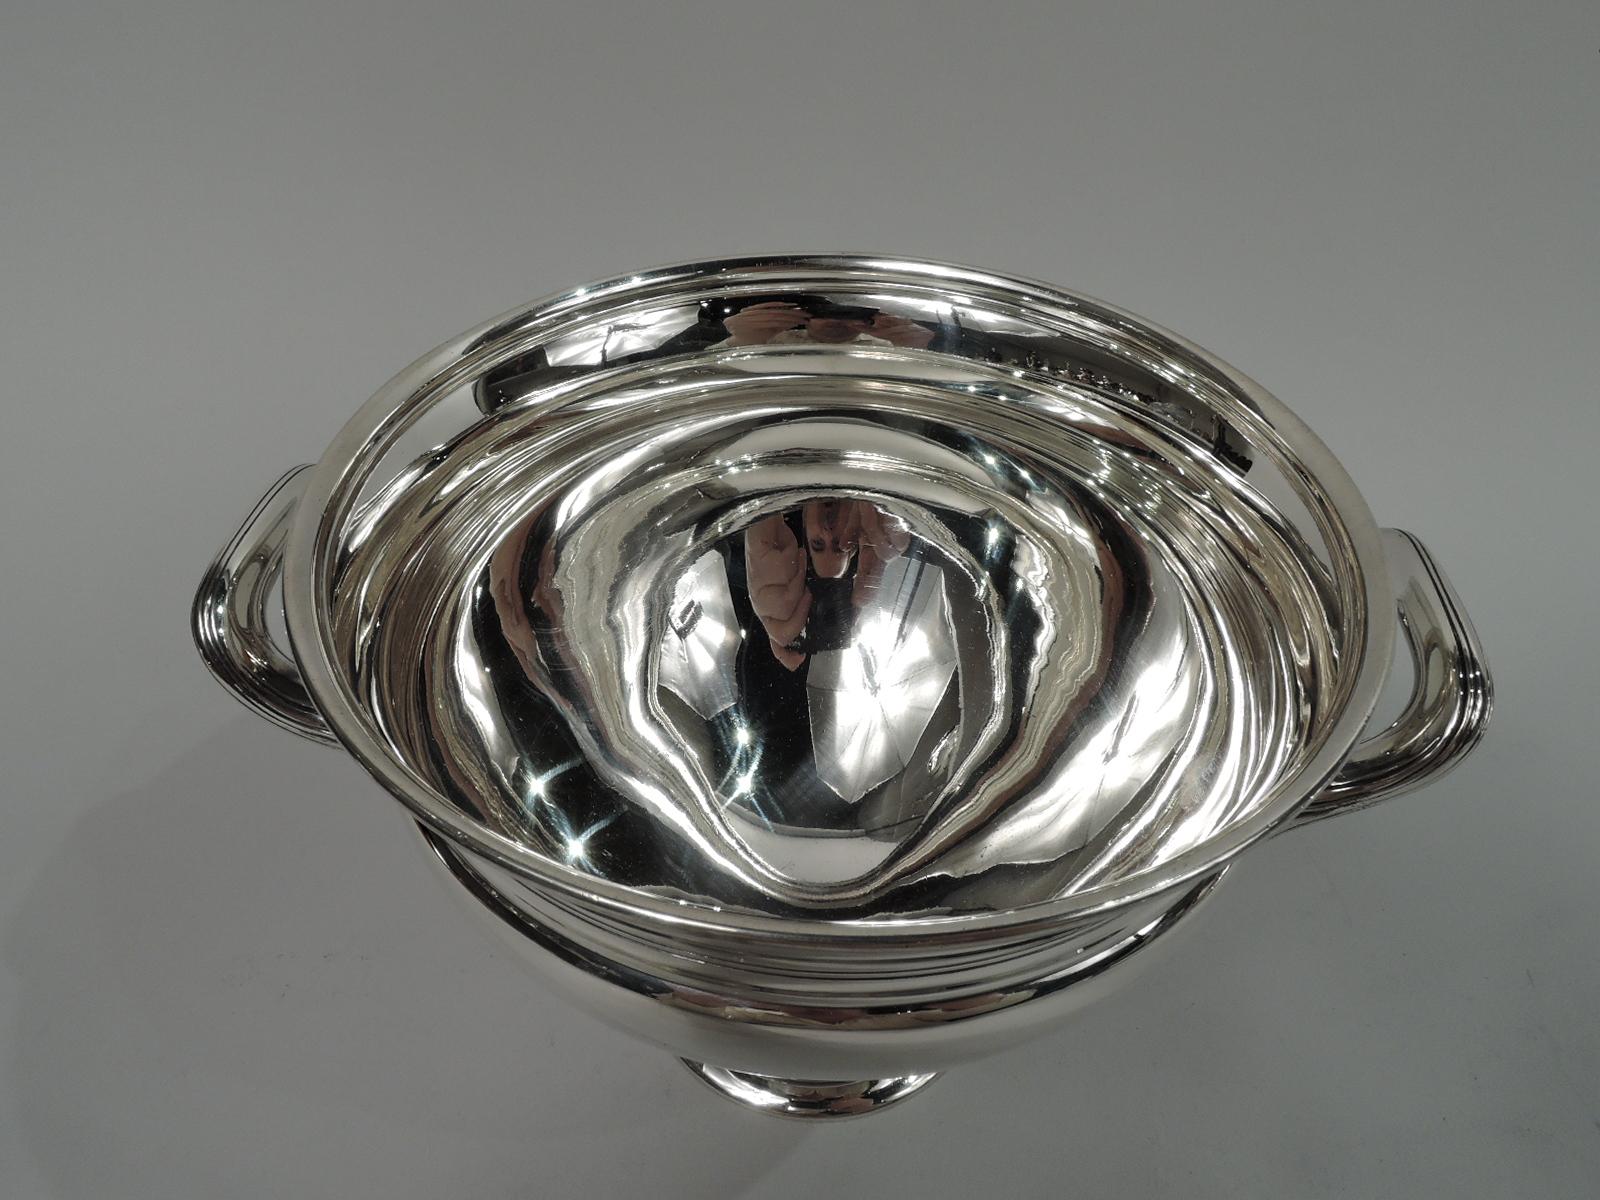 Modern Classical sterling silver bowl. Made by Tiffany & Co. in New York, ca 1921. Tapering with inset neck and flared rim. Reeded bracket side handles. Raised foot. Incised linear bands. Fully marked including maker’s stamp, pattern no. 19847